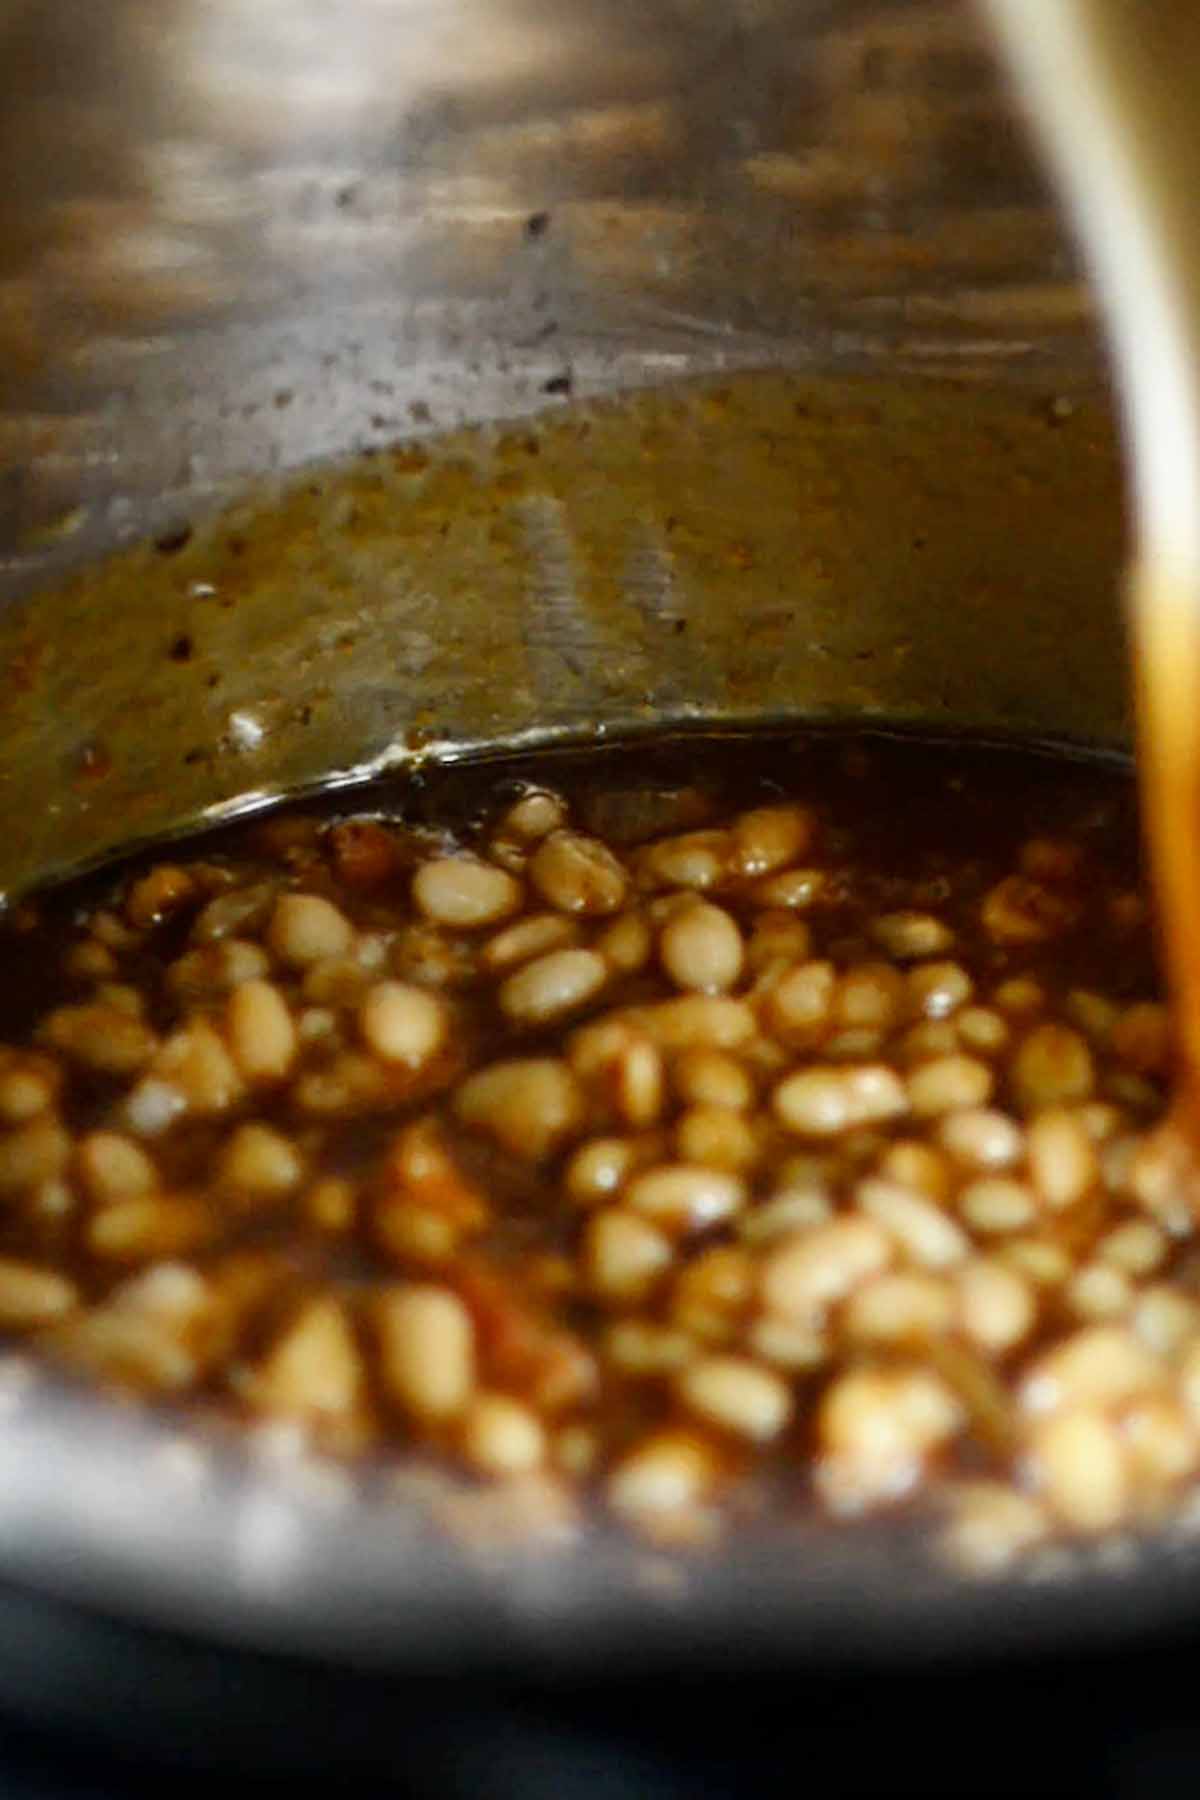 Baked beans being stirred in an Instant pot before being fully cooked.